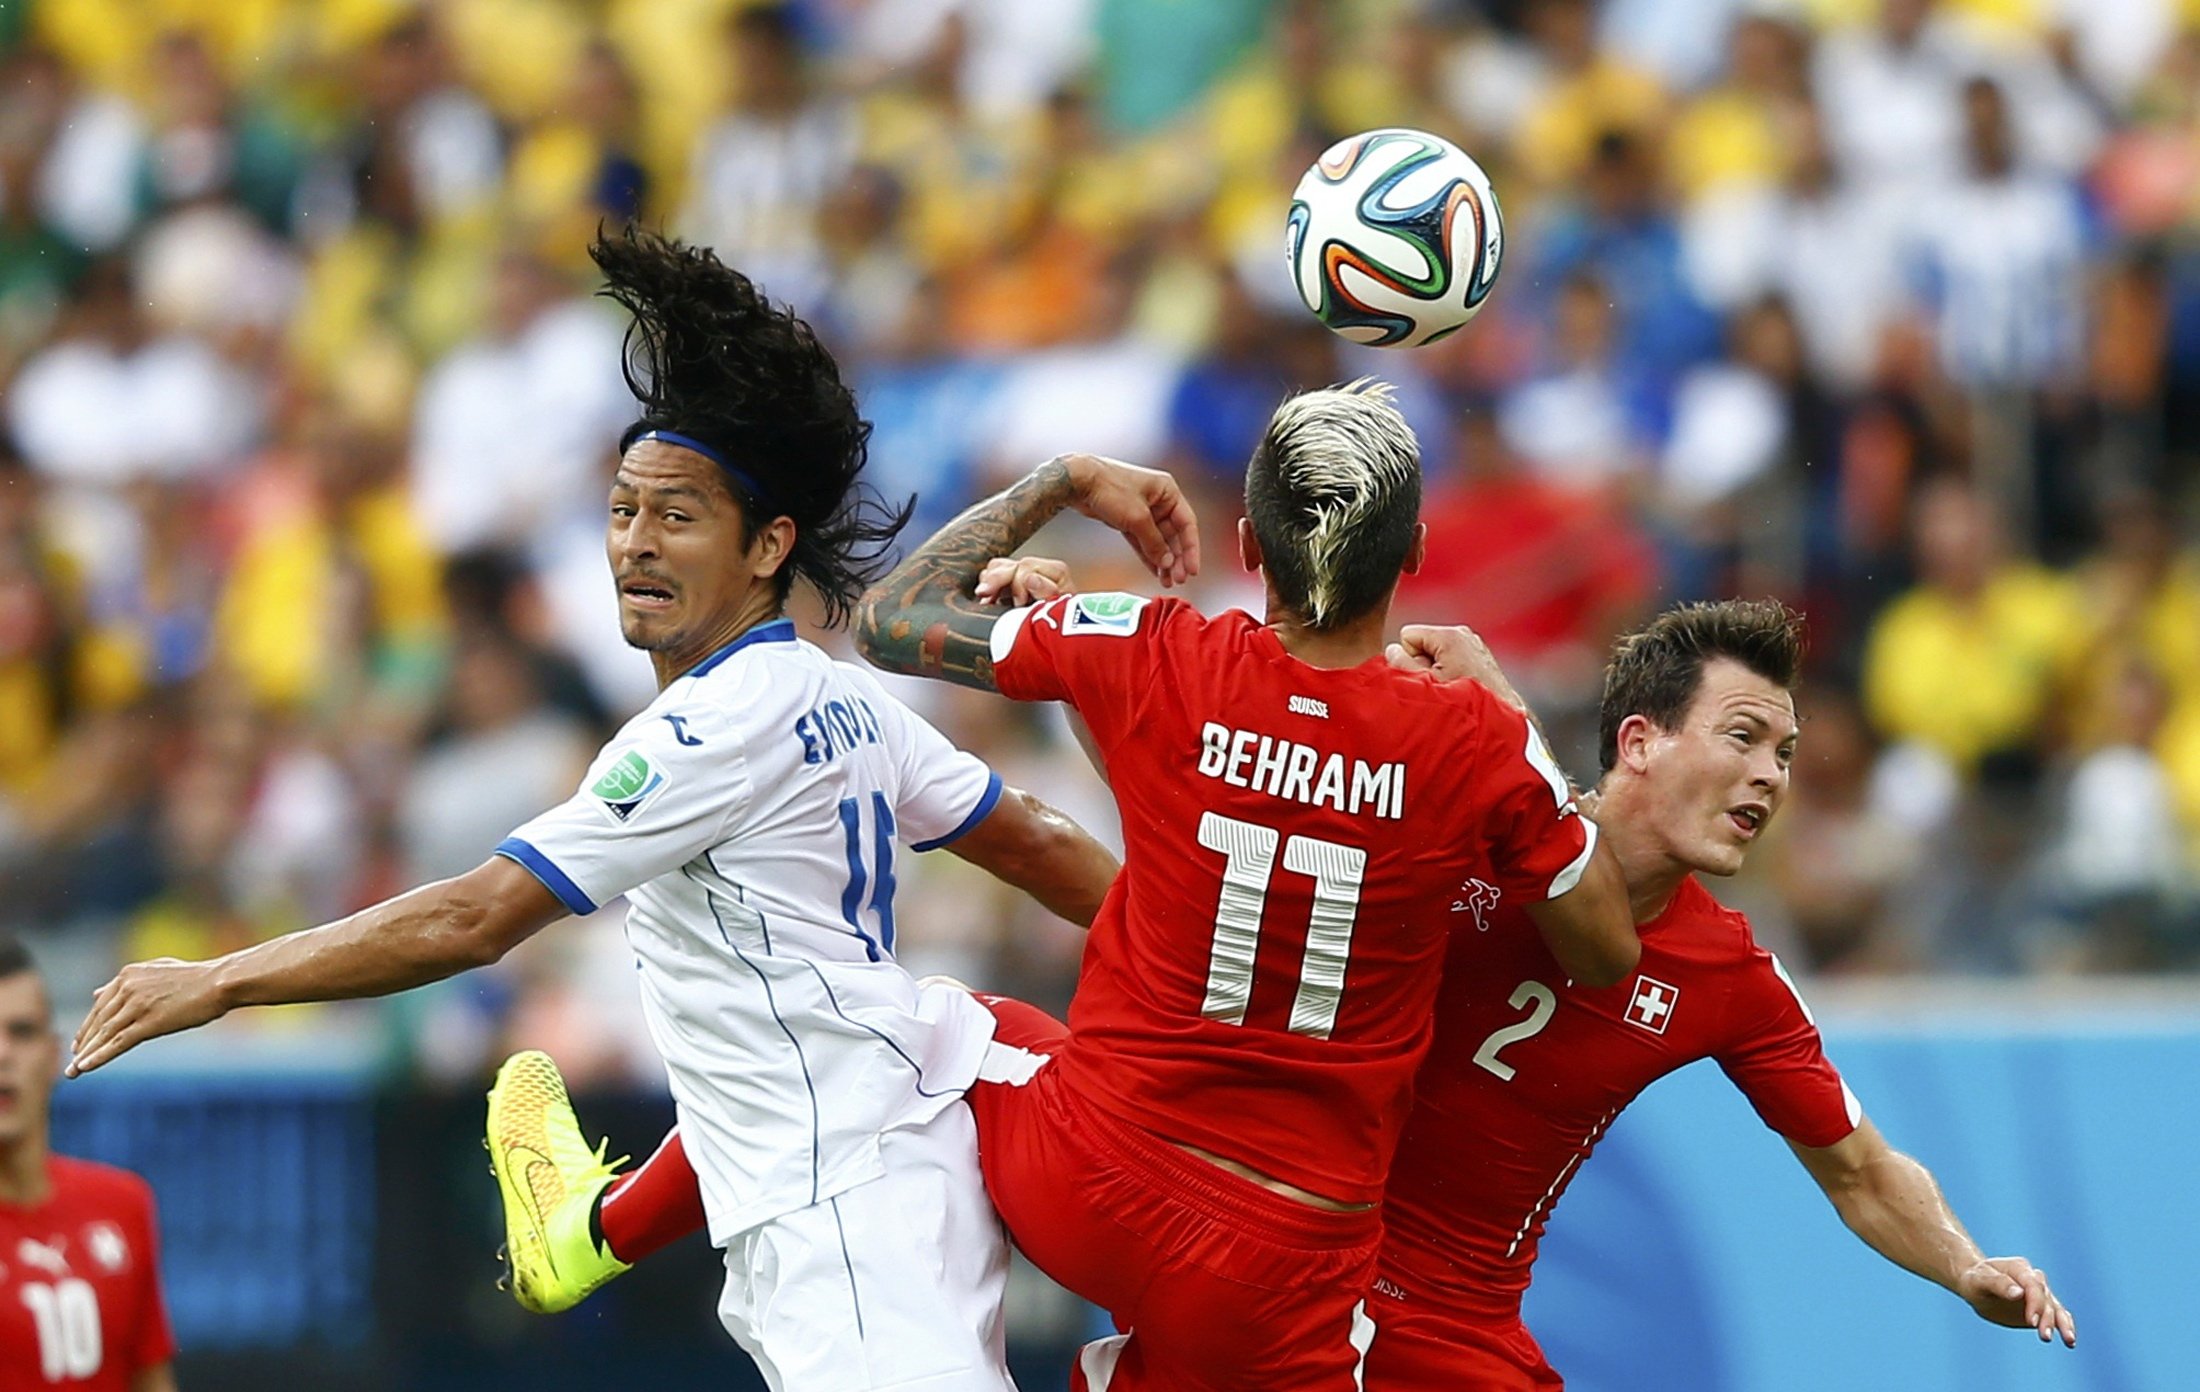 Roger Espinoza of Honduras fights for the ball with Switzerland's Valon Behrami and Stephan Lichtsteiner during their match at the Amazonia arena in Manaus, Brazil onJune 25, 2014.